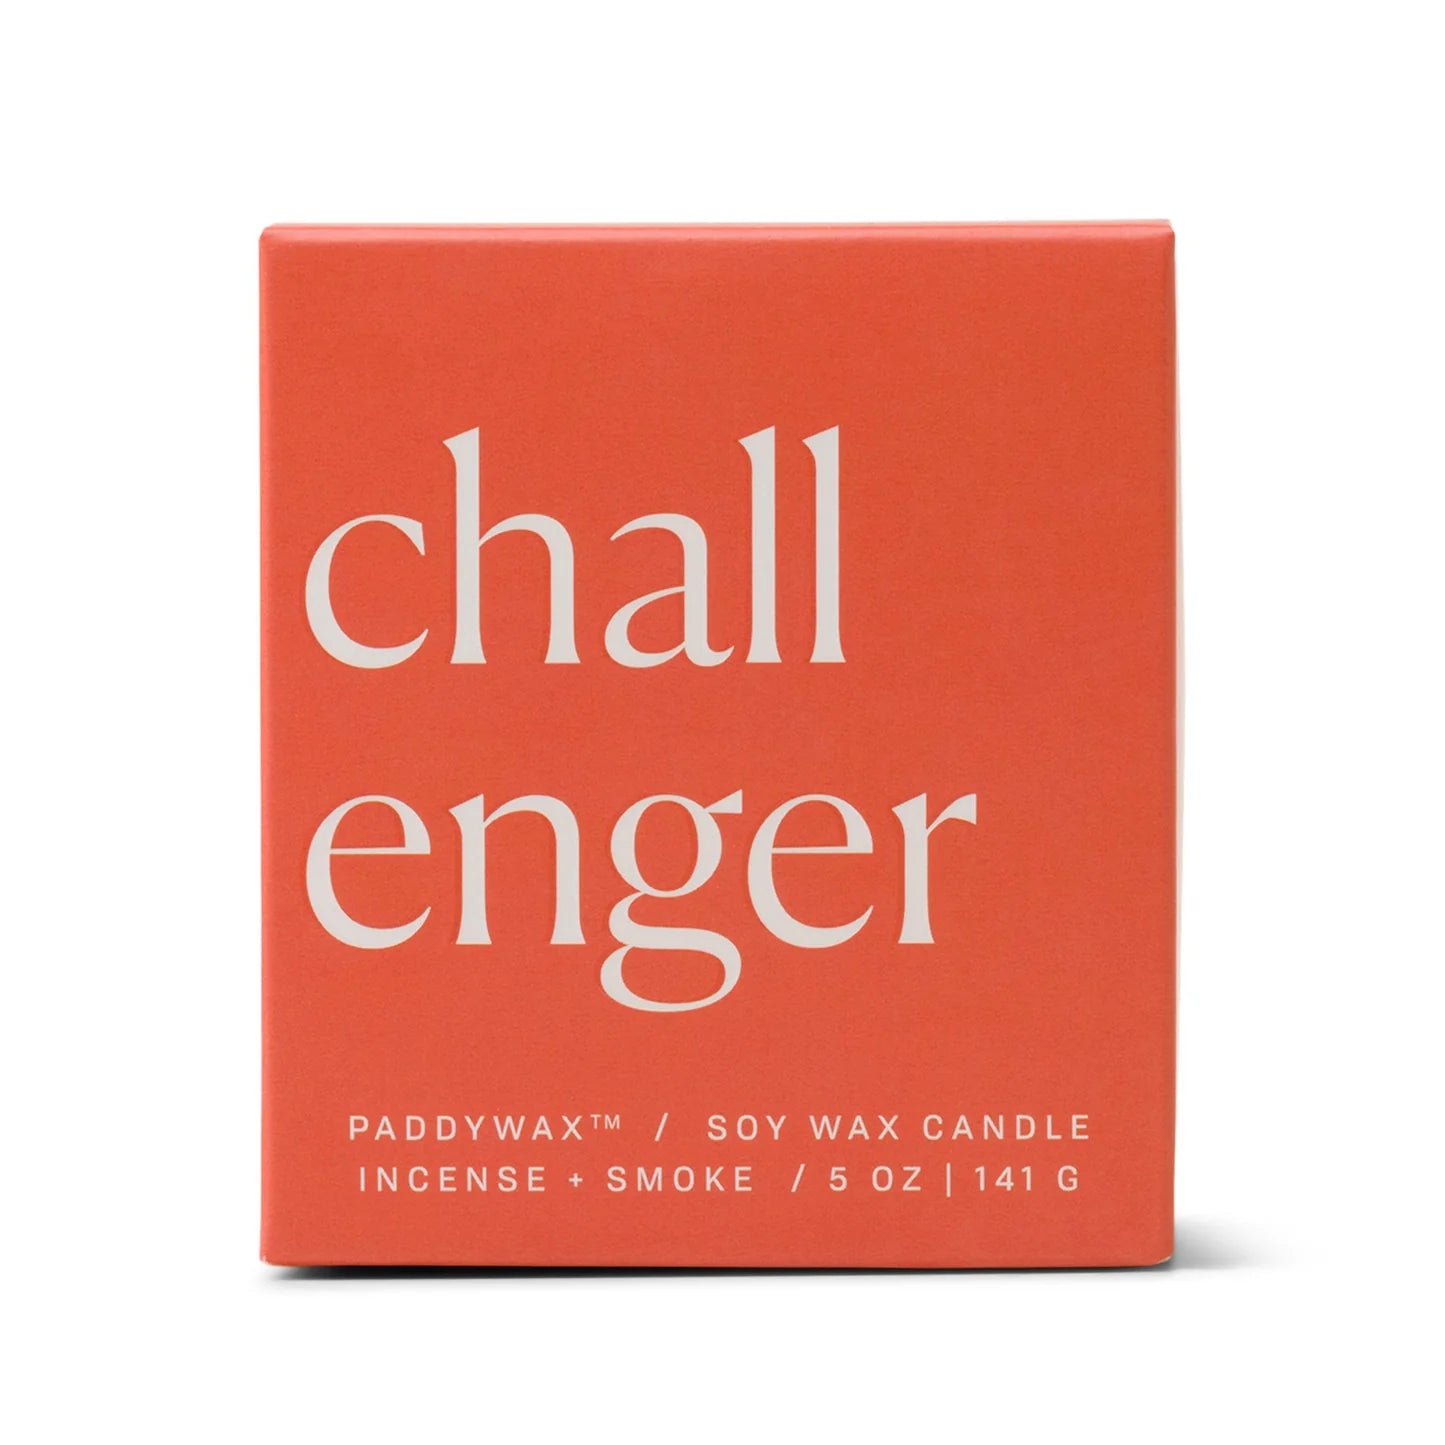 Enneagram #8 The Challenger Candle - Incense + Smoke